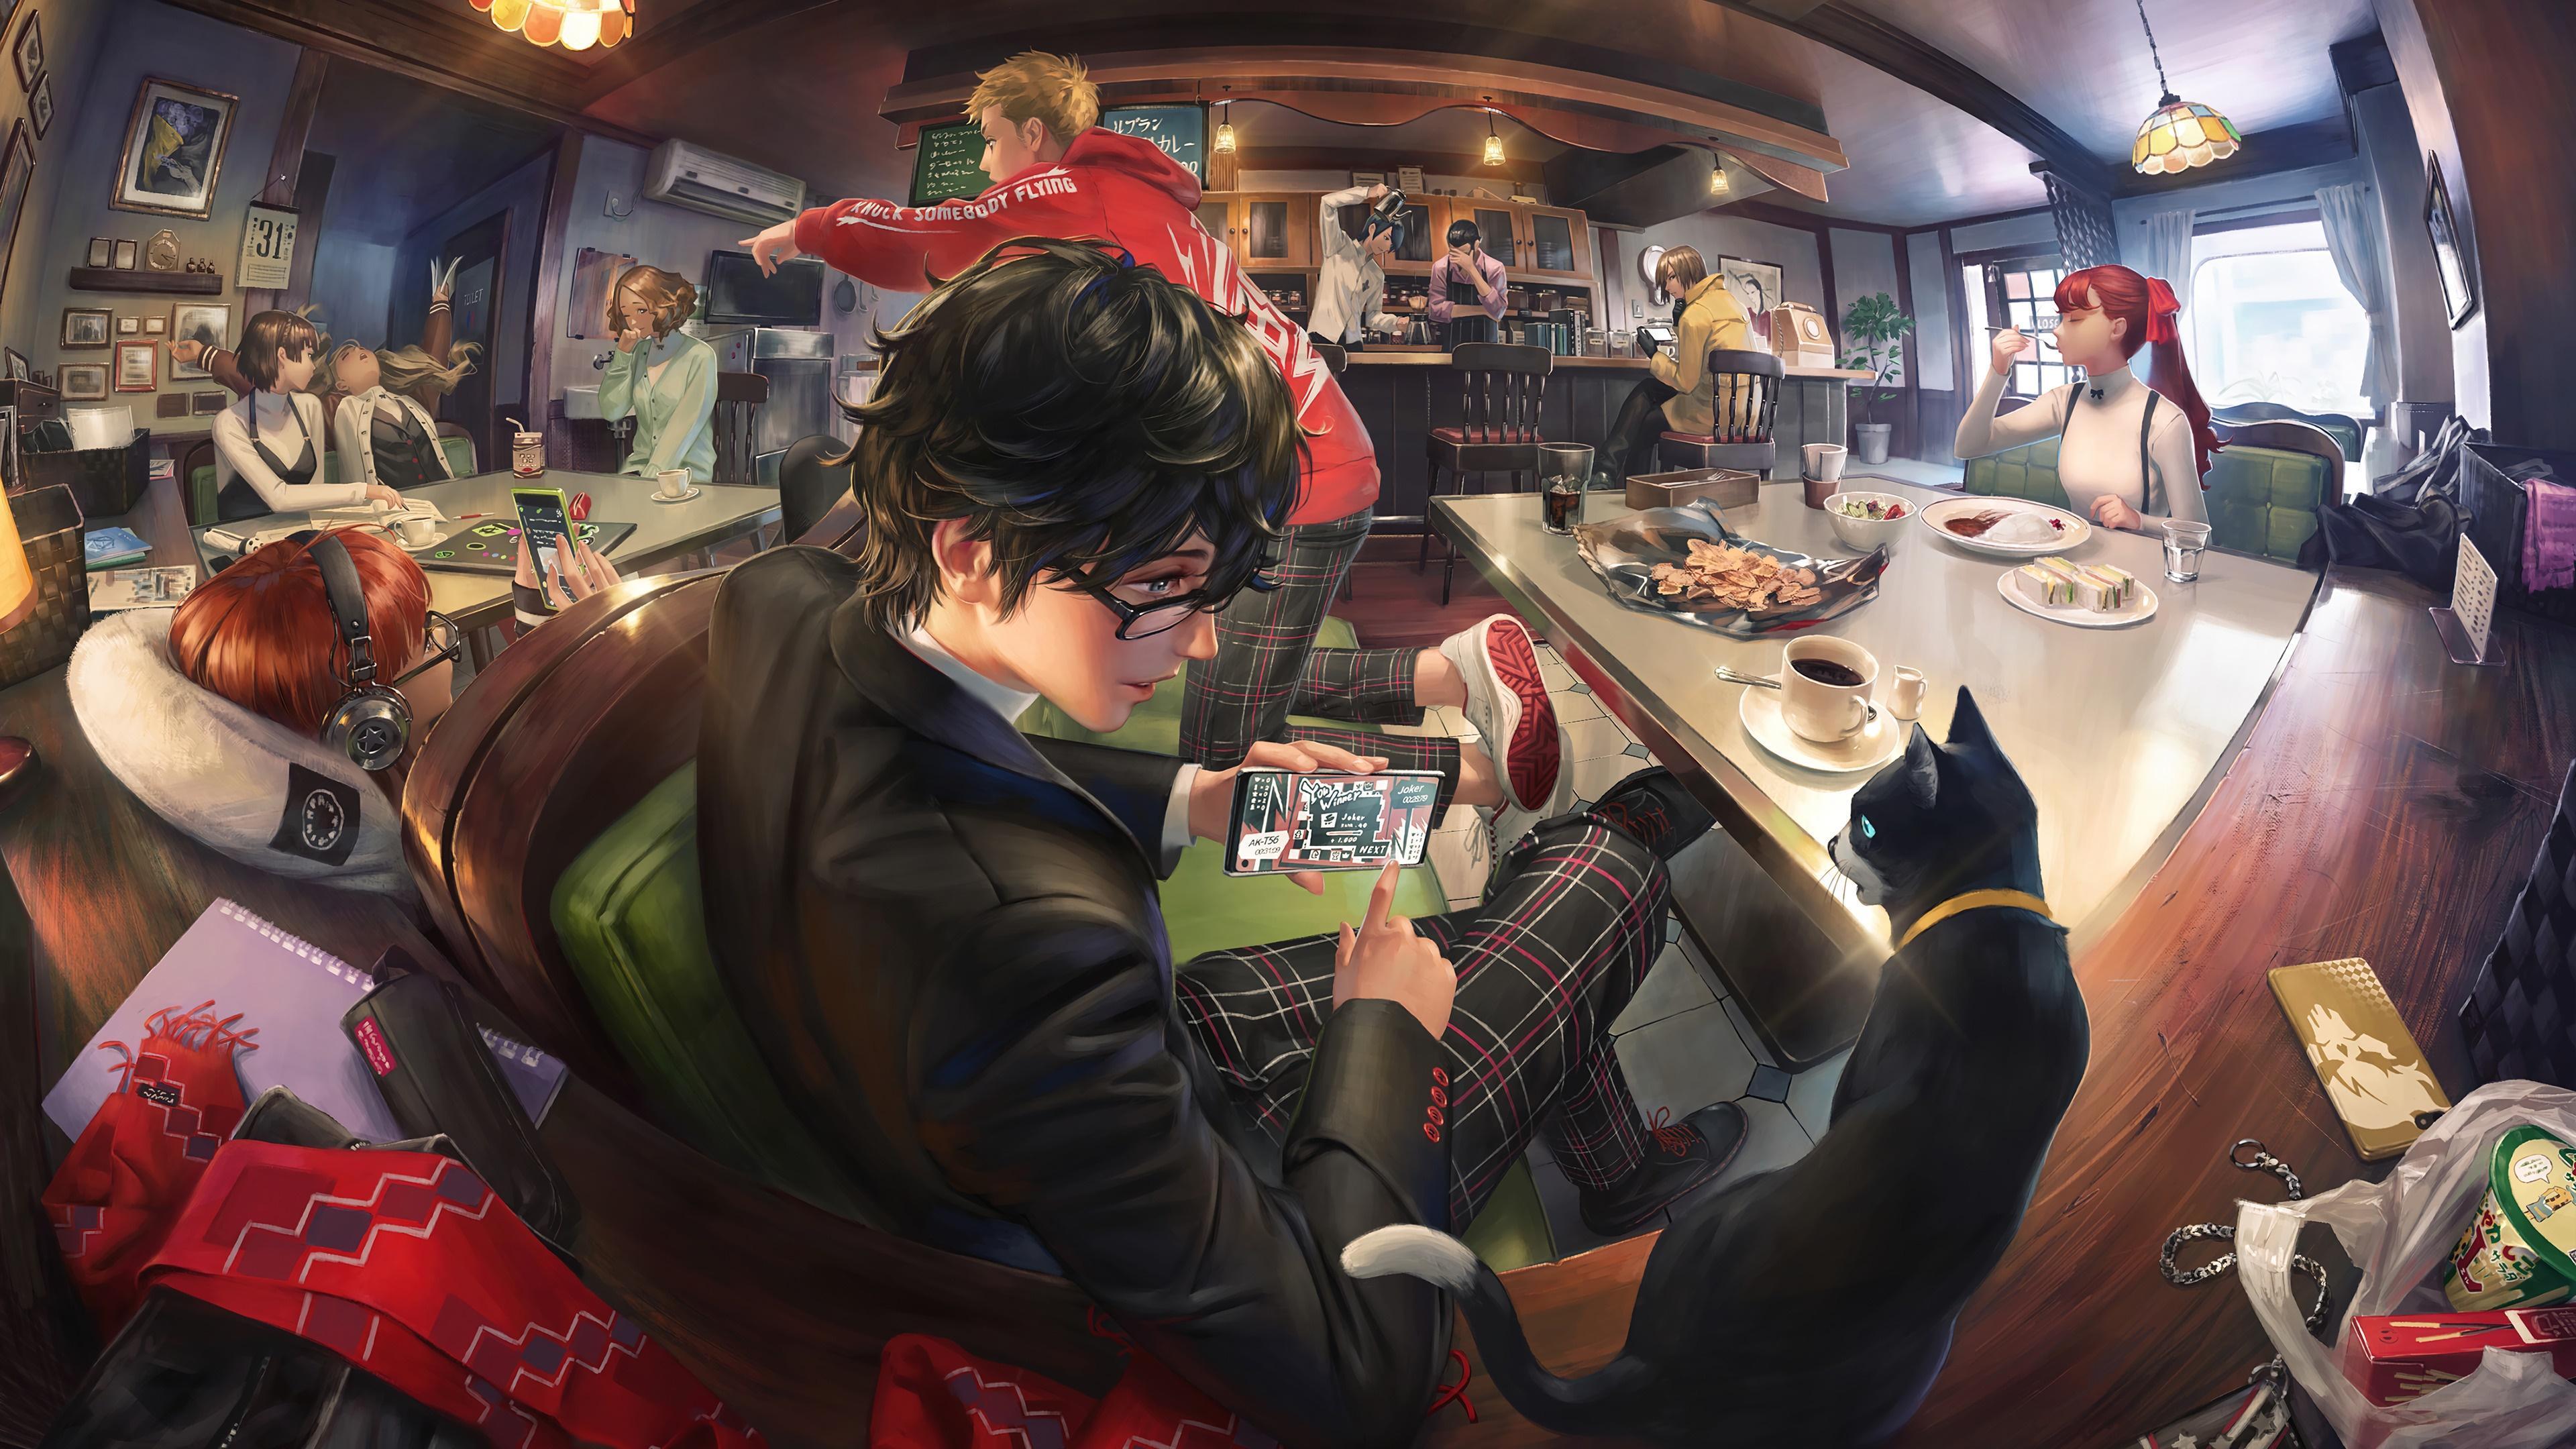 HD wallpaper, Cafe, Art, Characters, Persona 5, Game, 4K